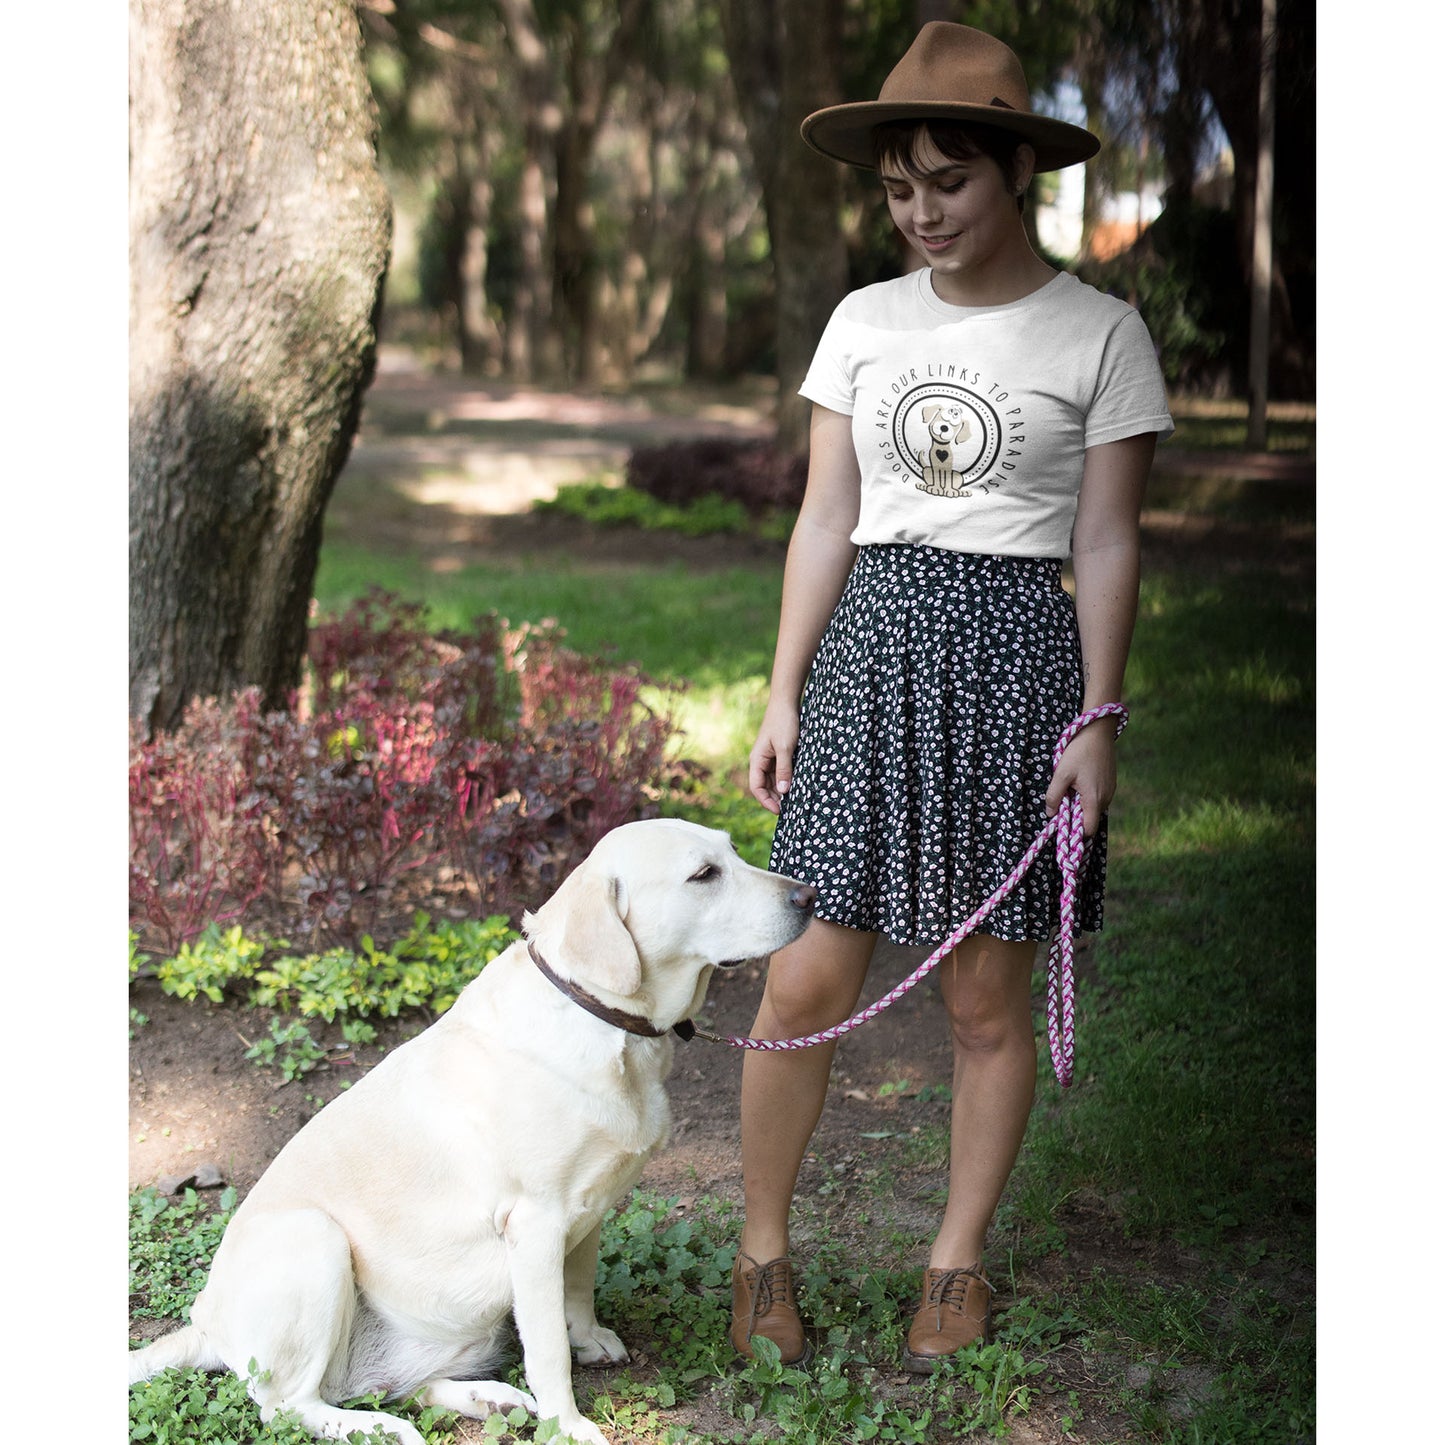  In a park, a woman dressed in a white 'Dogs Pure Love, Dogs are Paradise' unisex tee stands, her gaze directed downwards towards her Labrador Retriever on a leash.